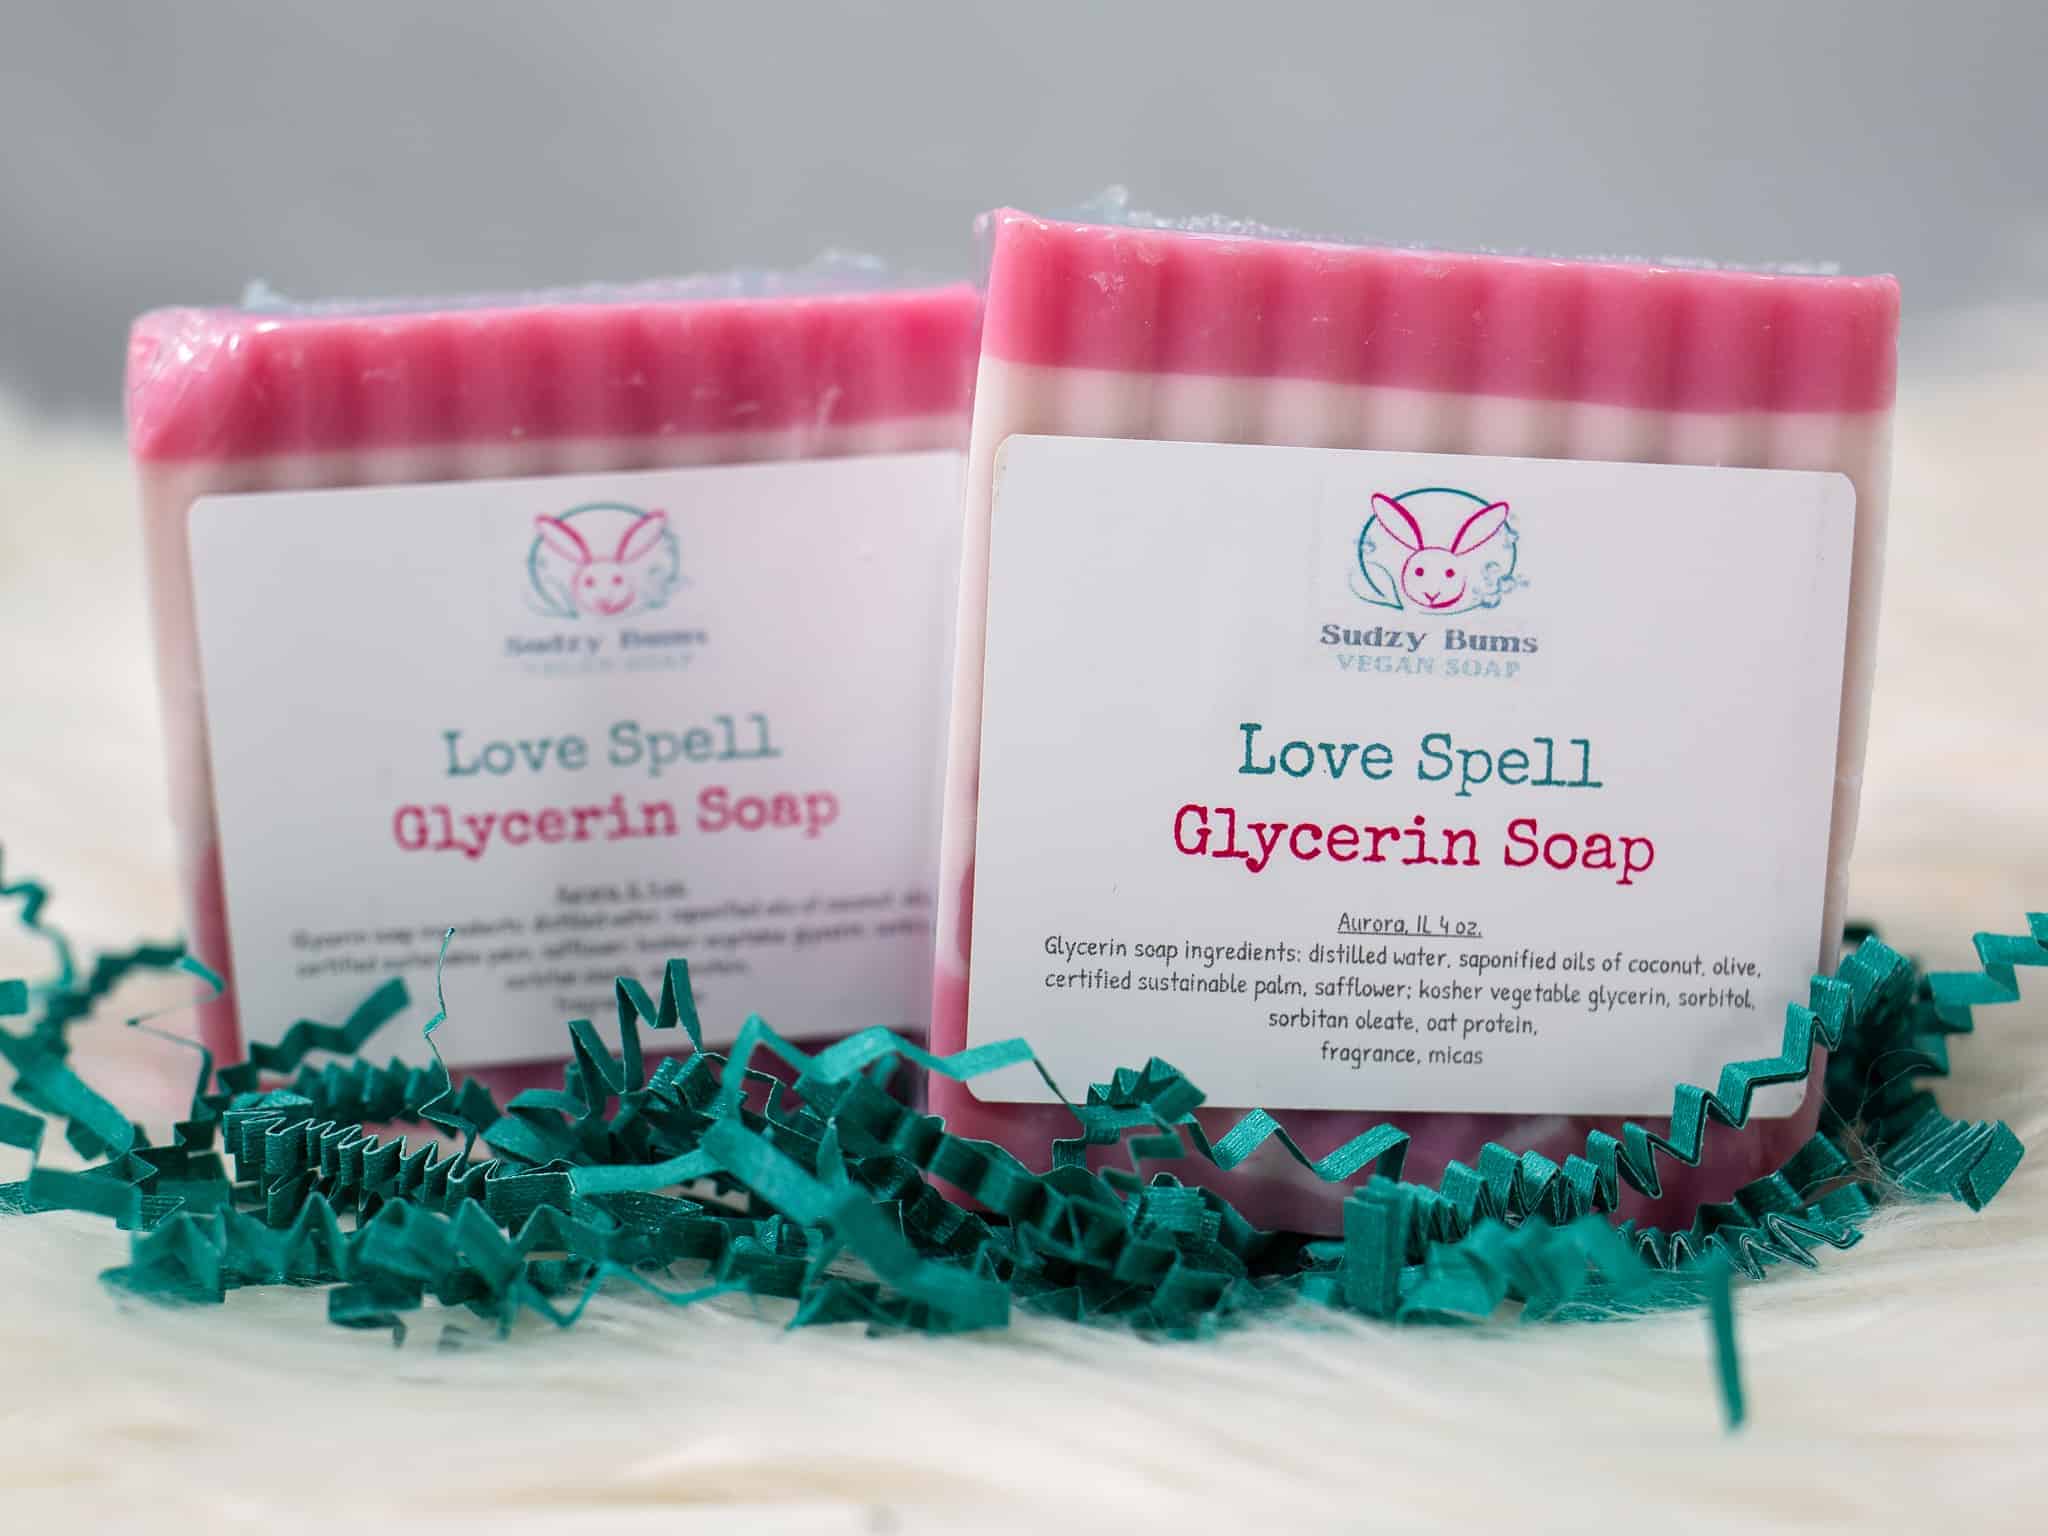 This Love Spell Vegan Glycerin soap is made with love by Sudzy Bums! Shop more unique gift ideas today with Spots Initiatives, the best way to support creators.